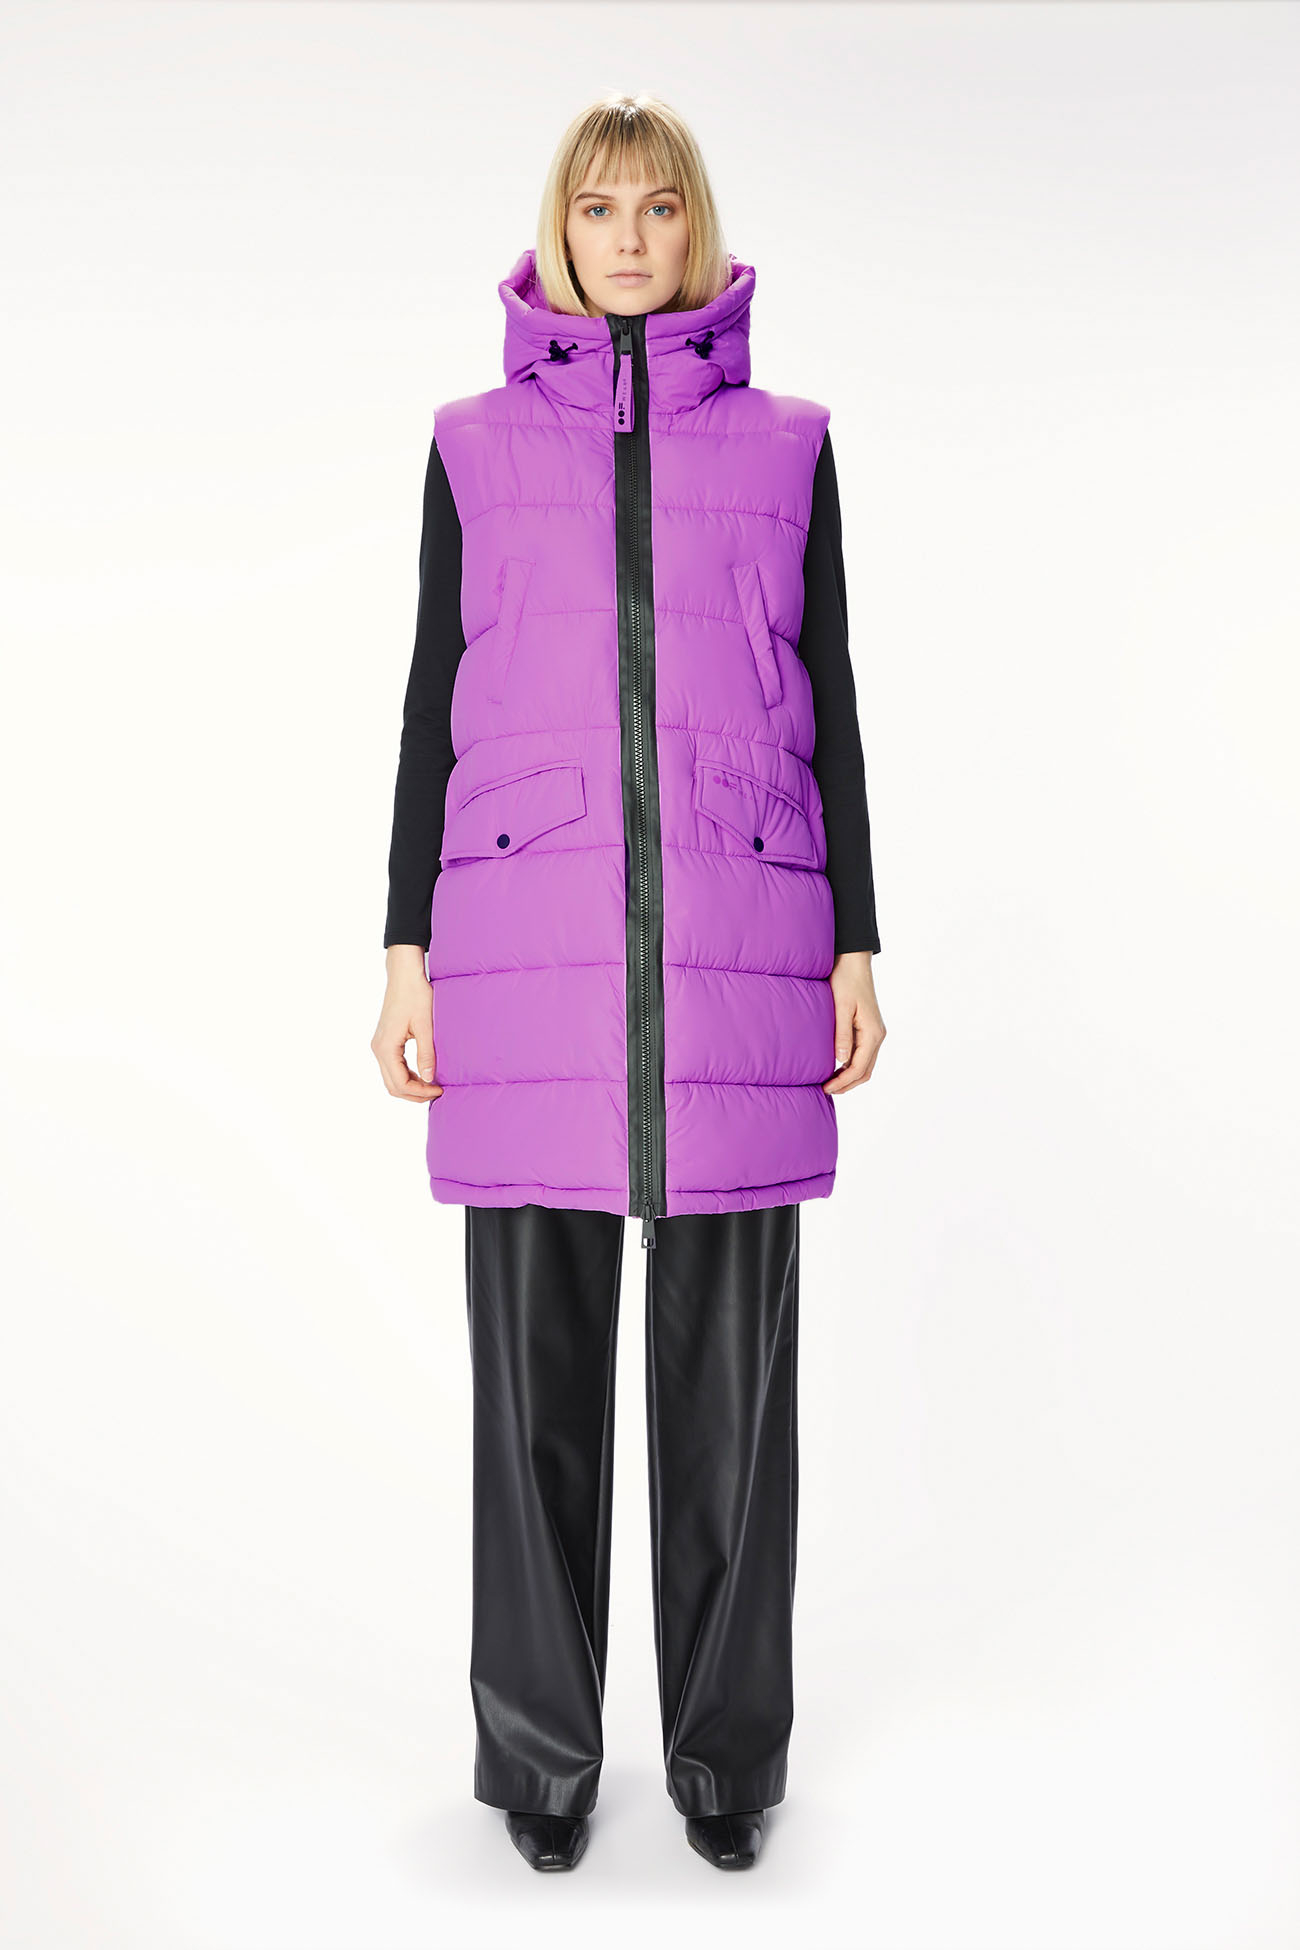 JACKET 9099 MADE IN WATER RESISTANT NYLON - ORCHID - OOF WEAR